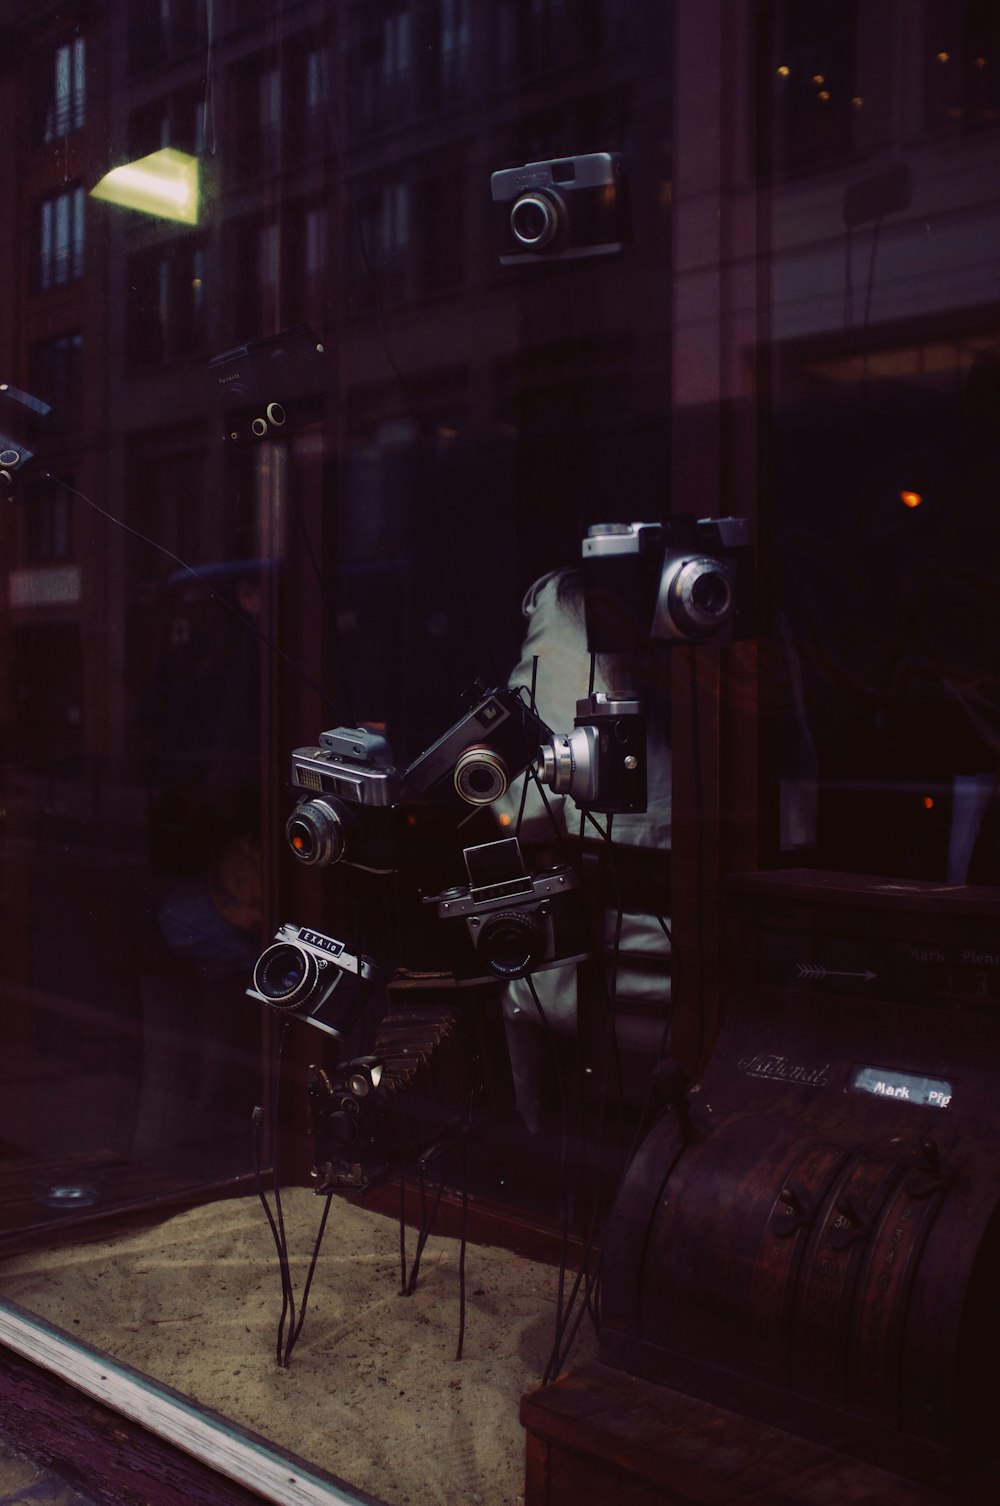 a window display with a camera and other items